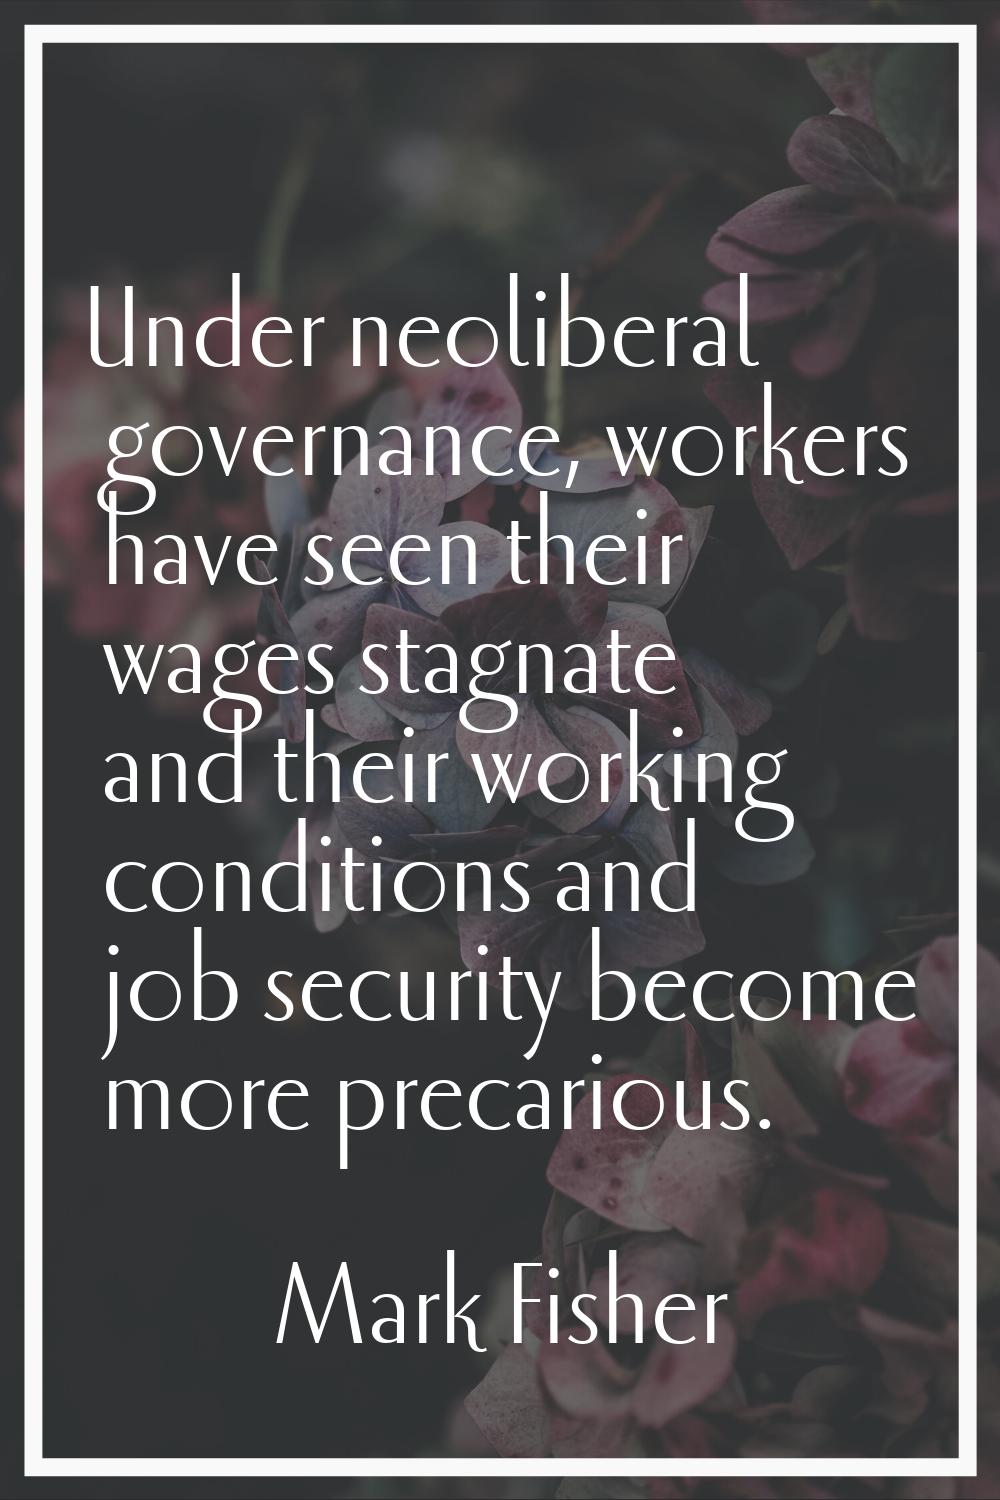 Under neoliberal governance, workers have seen their wages stagnate and their working conditions an